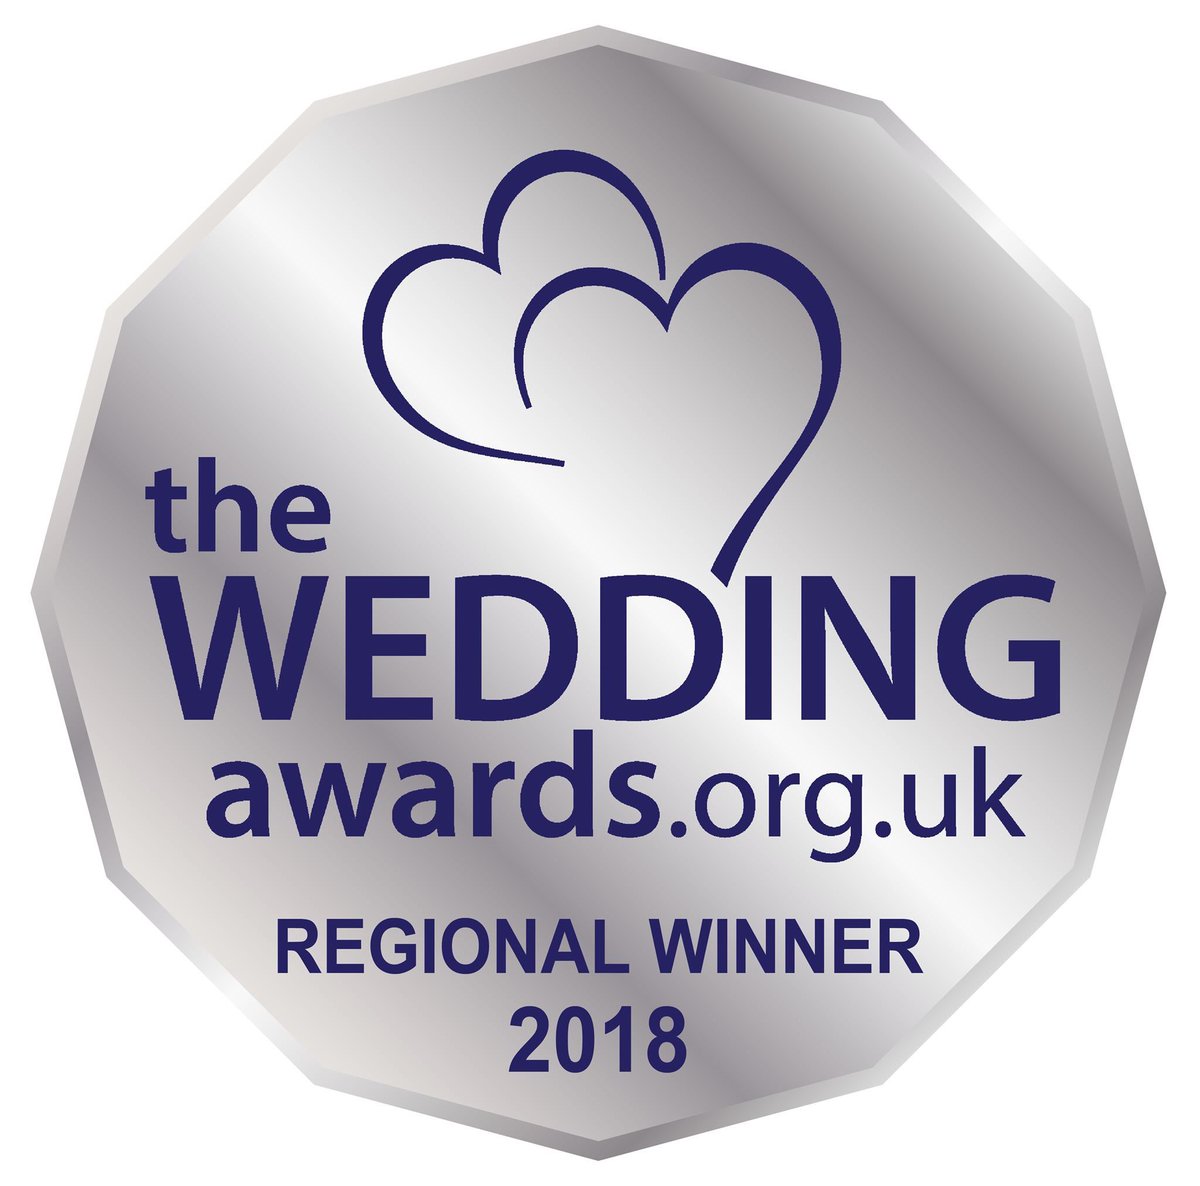 We have been awarded WINNER of best wedding fair in the south west for our event @DorsetWedFest by @TheWeddAwards 🏆 

#winner #dorsetwedfest #weddingfestival #dorsetwedding #award #weddings